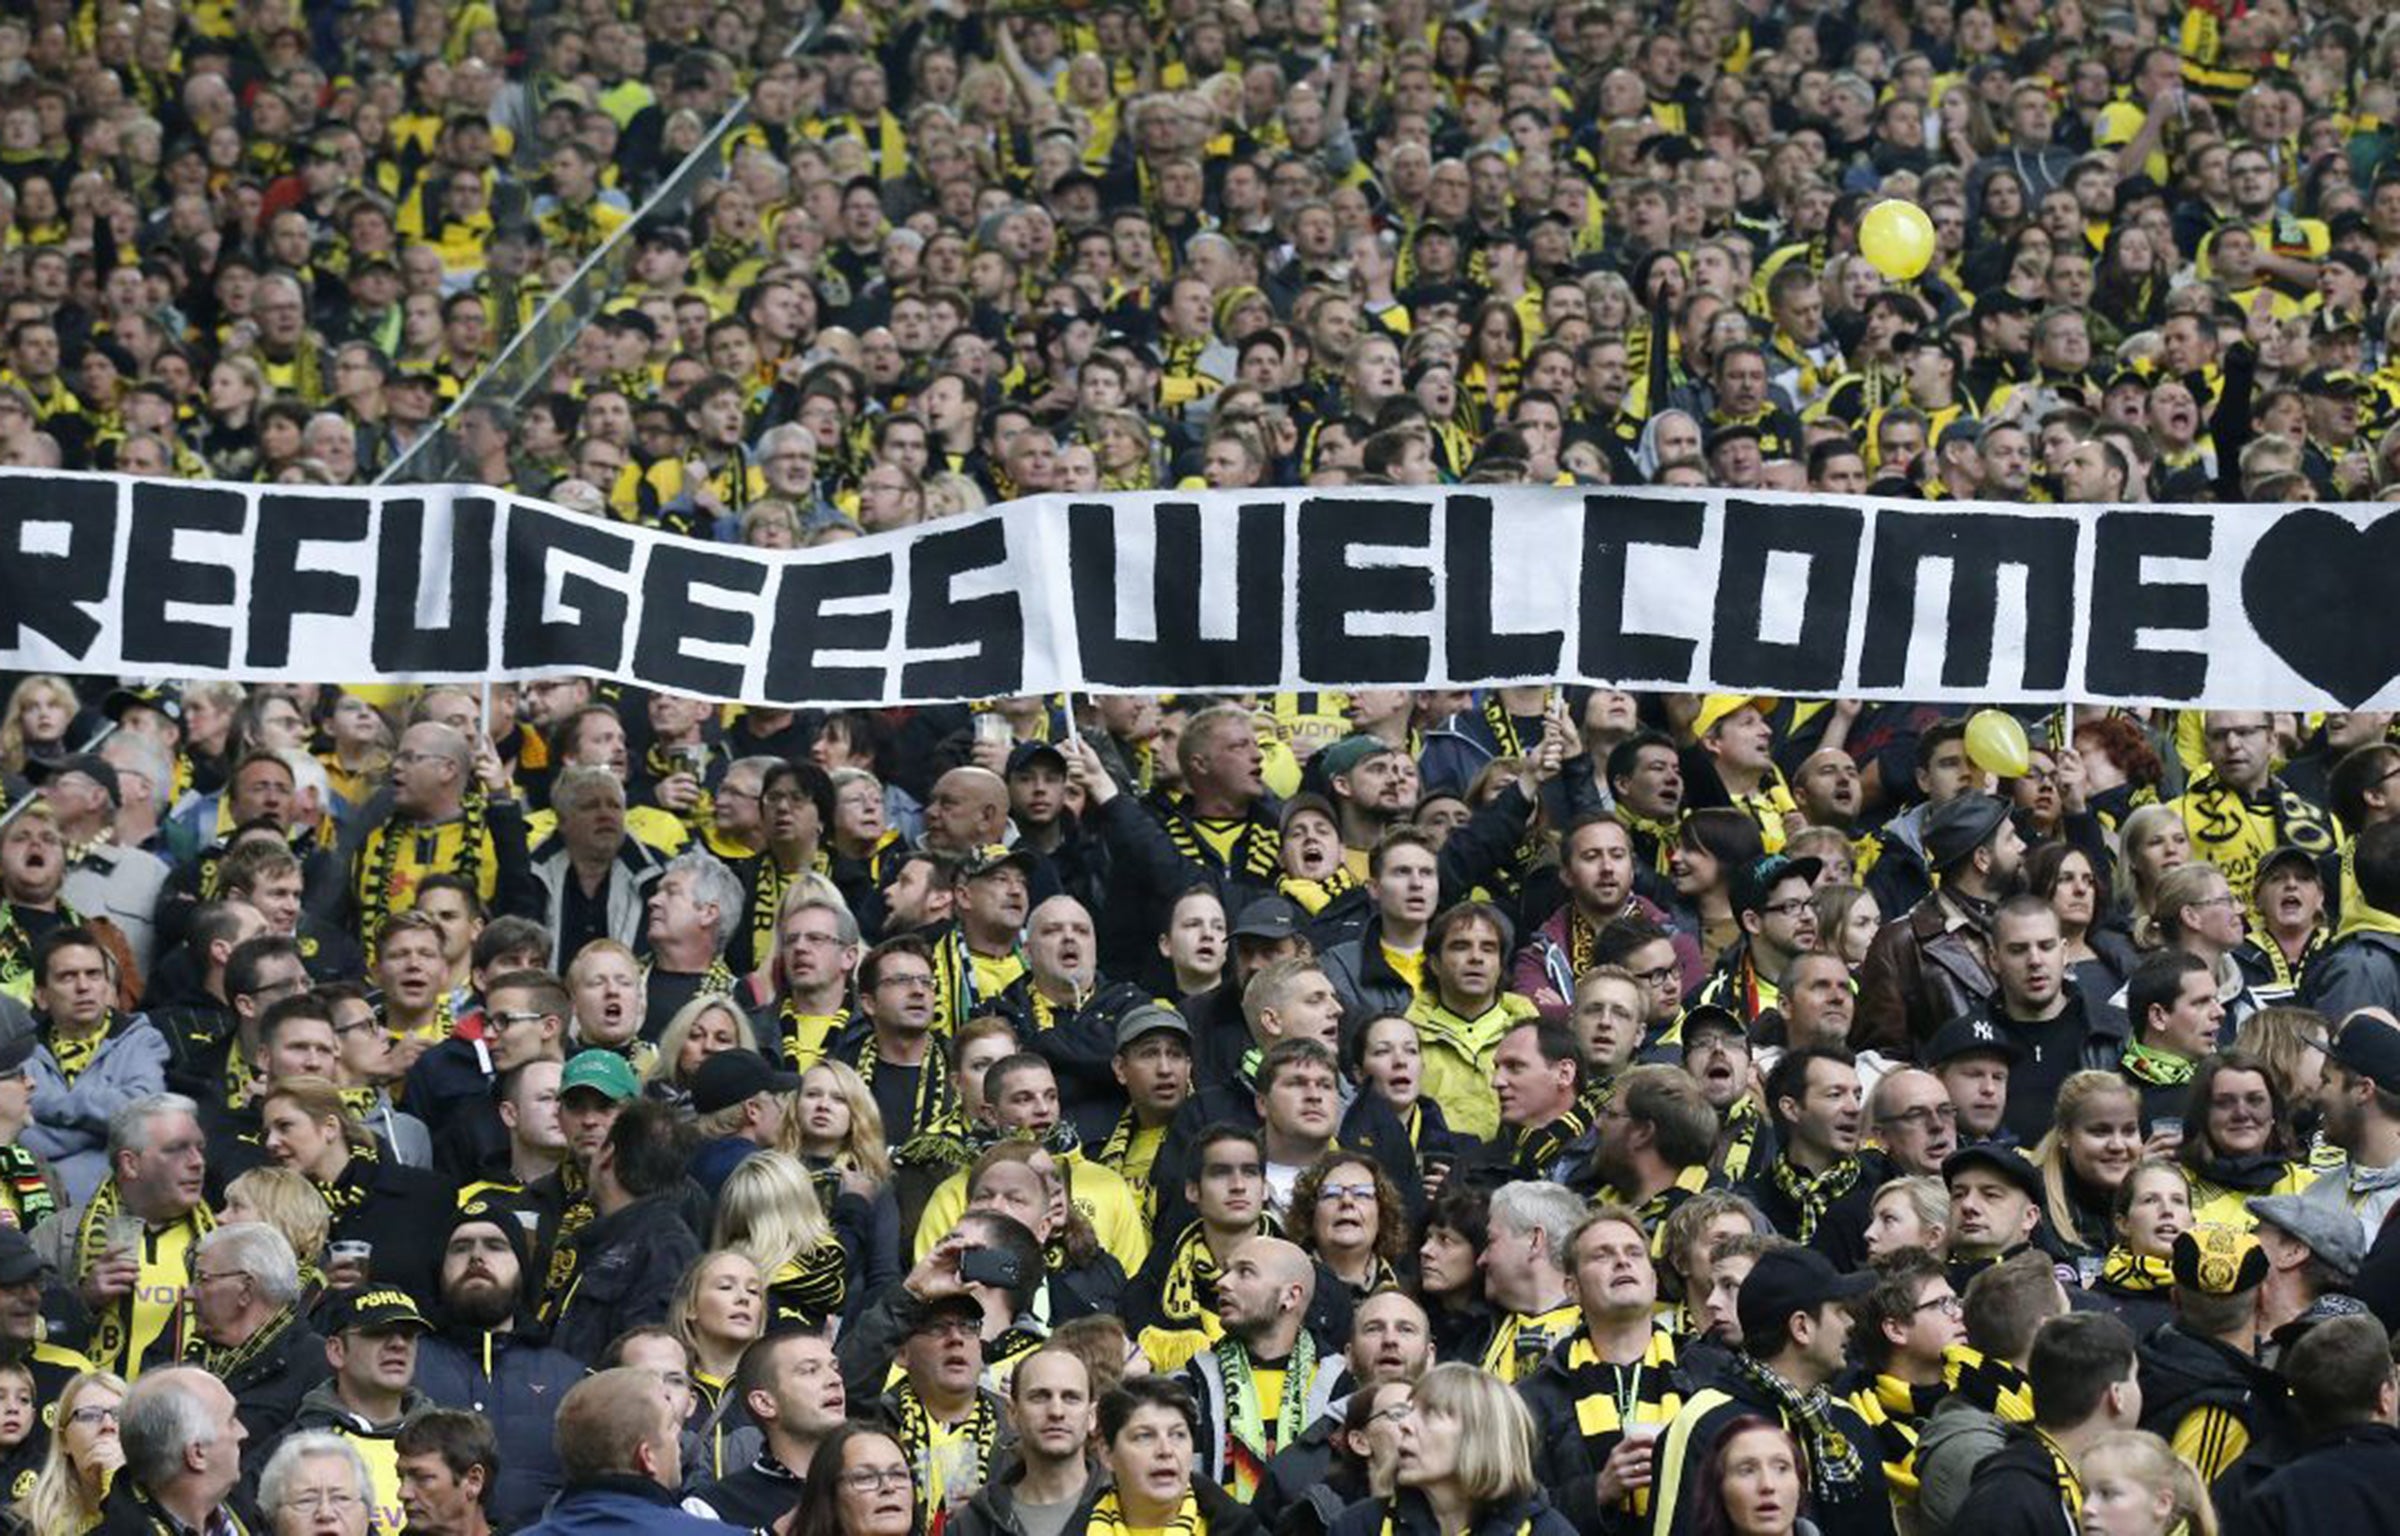 Dortmund supporters hold a banner welcoming refugees to Germany